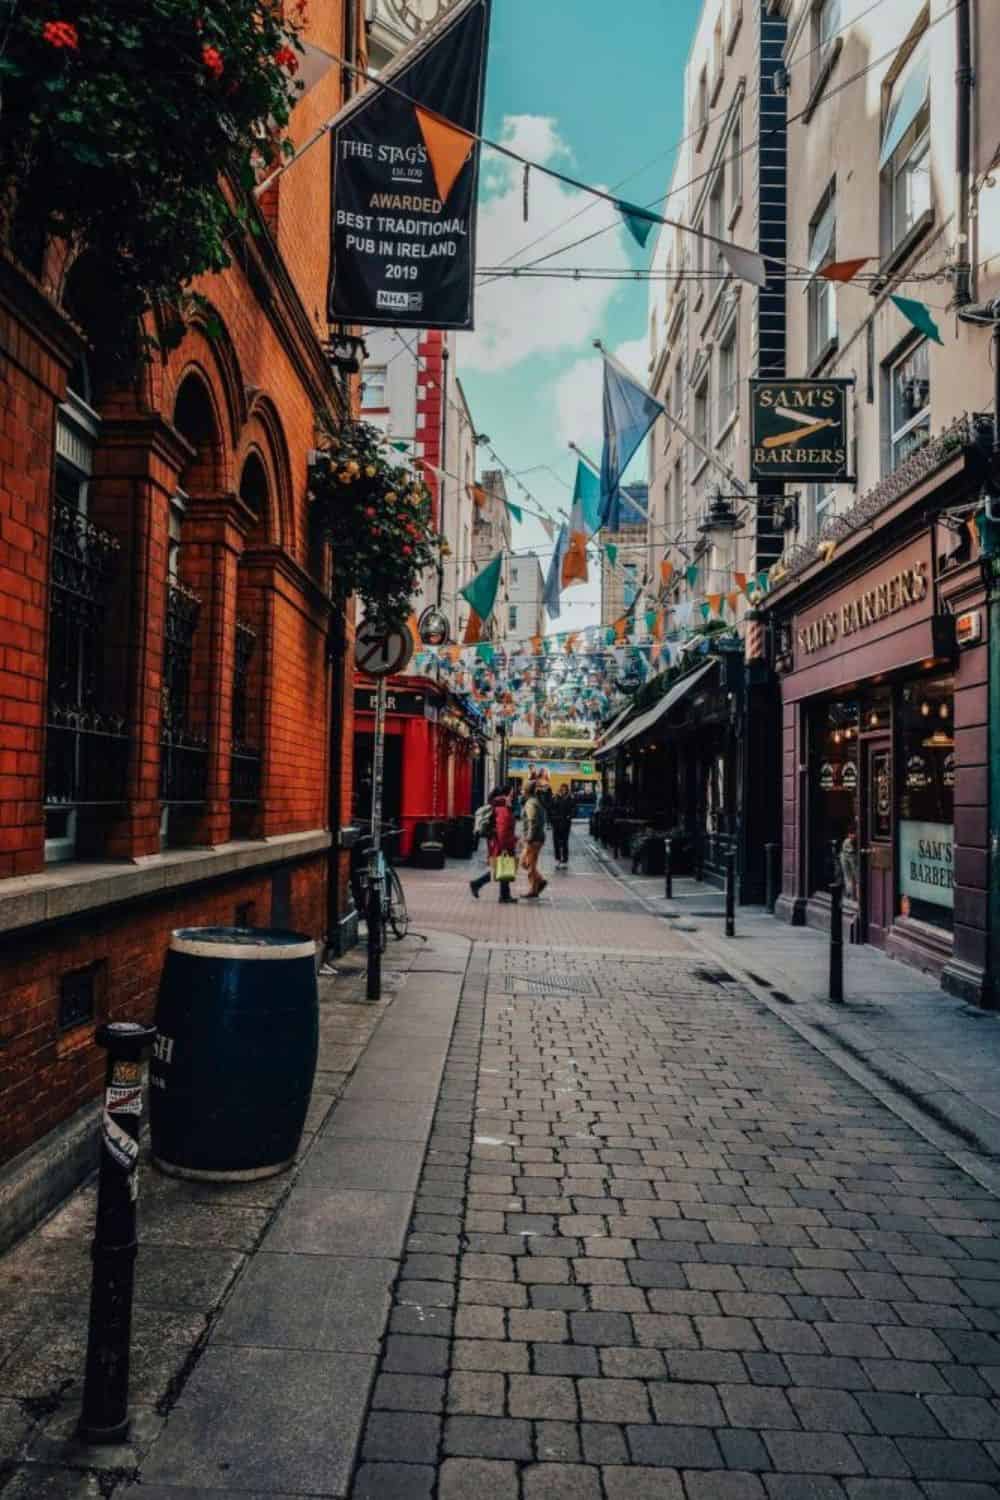 A picturesque view of a cobbled street in Dublin, lined with traditional red-brick buildings and colorful pubs, inviting solo travelers to explore its vibrant culture.